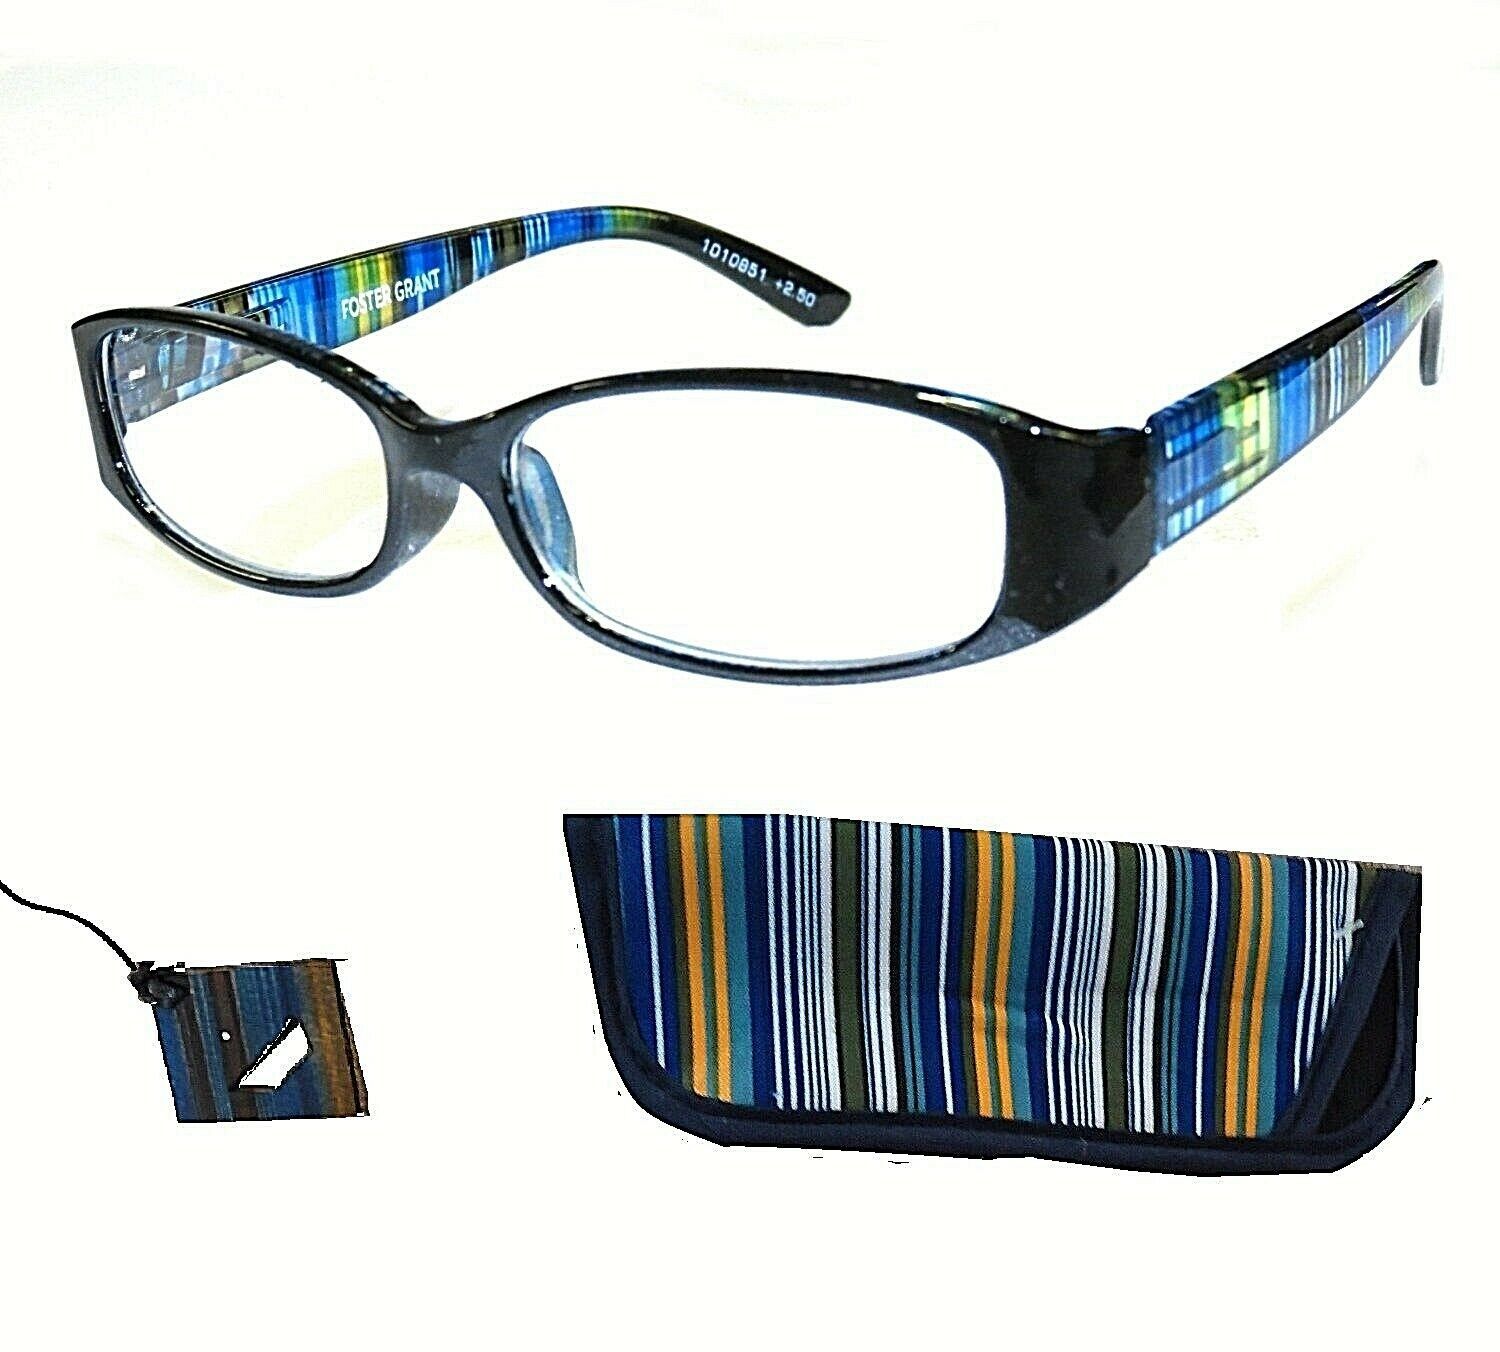 +1.00 Strength Foster Grant Black & Blue Rainbow Reading Glasses w Case Spg Hngs